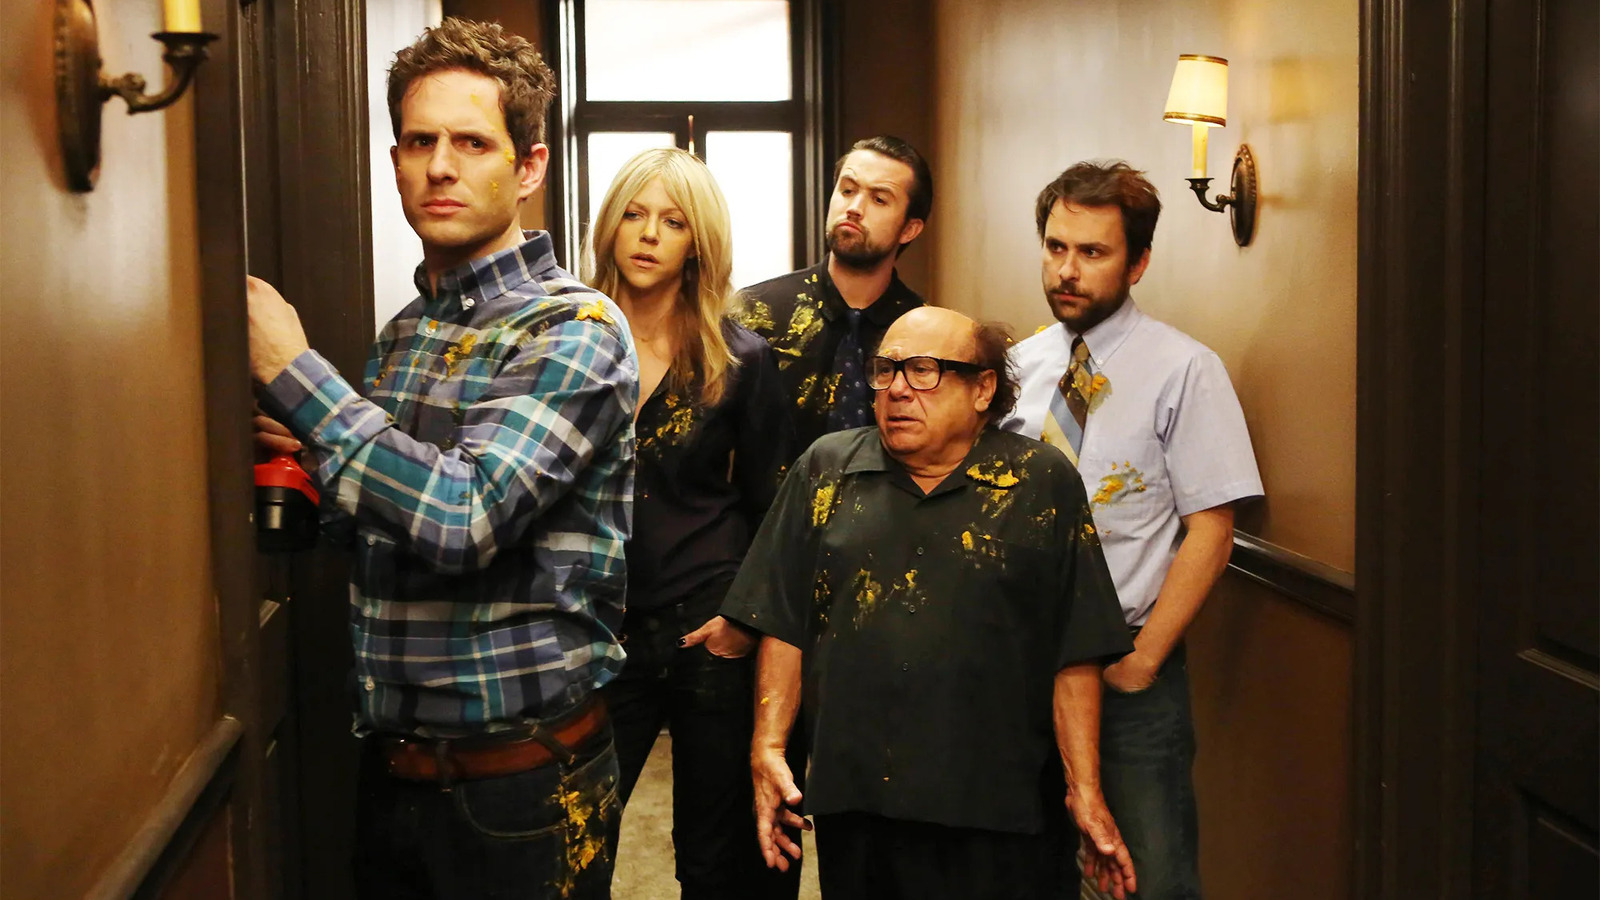 The One Way It’s Always Sunny In Philadelphia Beats All Other TV Shows